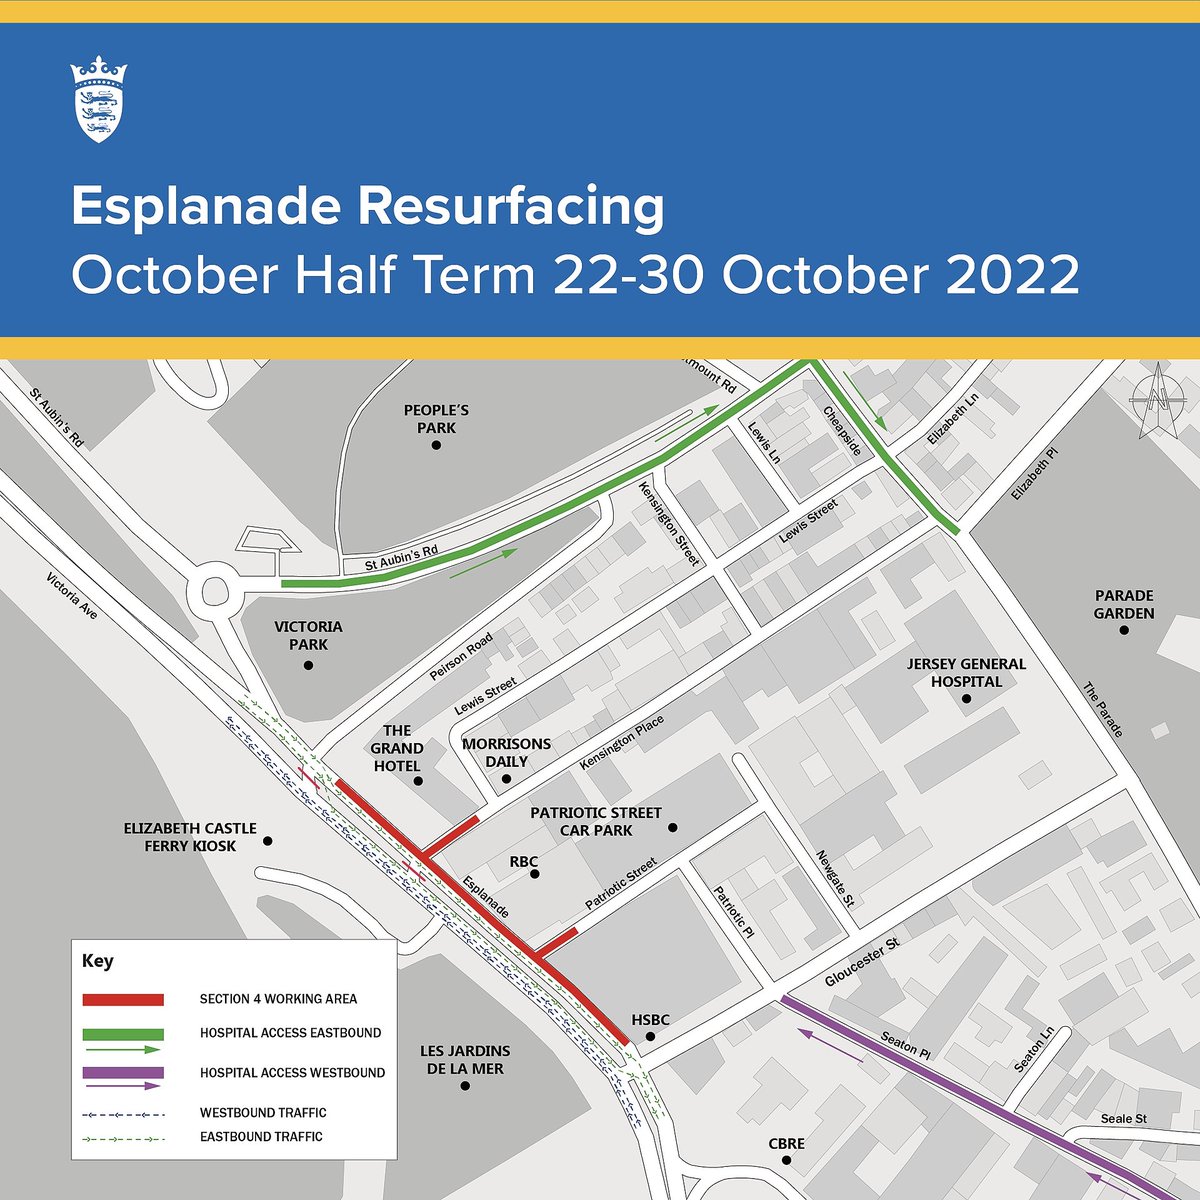 Work begins today to resurface the eastbound carriageway of the Esplanade, between The Grand hotel and Gloucester Street.    The road will remain open in both directions throughout, but a contraflow and some diversions will be in place. More details: bit.ly/3mIOVUl